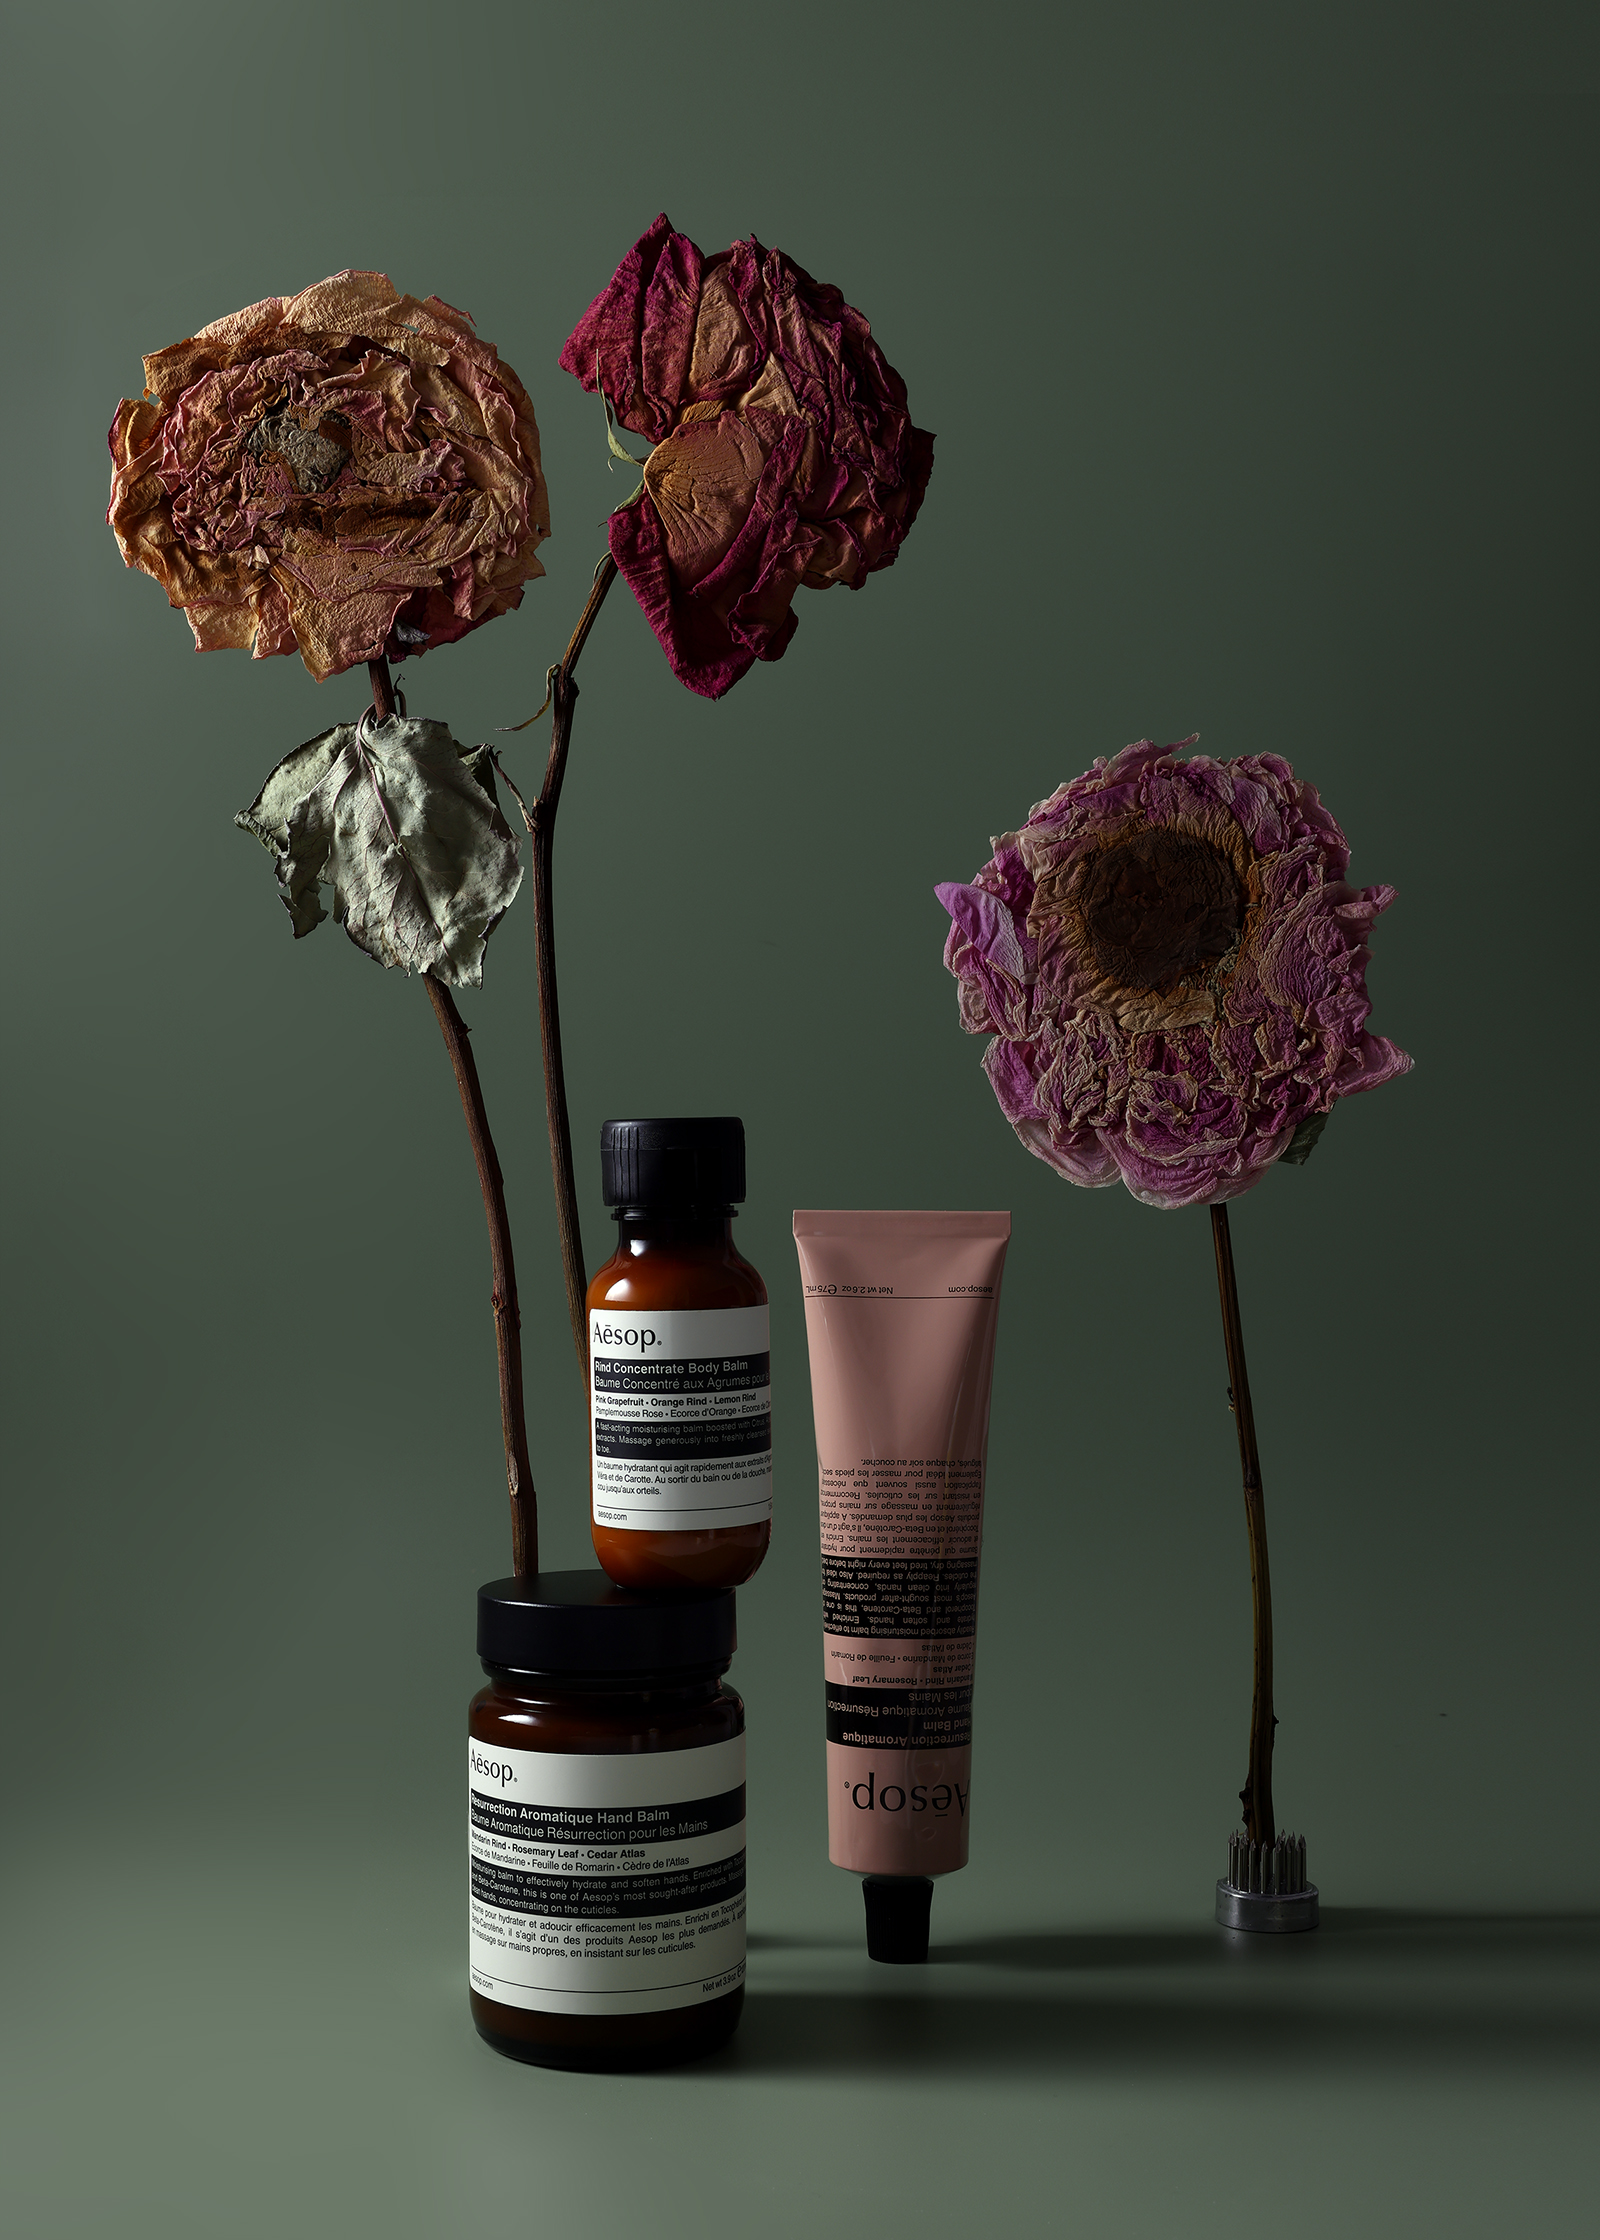 stilllife, styling, setting up, props, photography, stilllife photography, stilllife styling, stylist, beauty, cosmentics